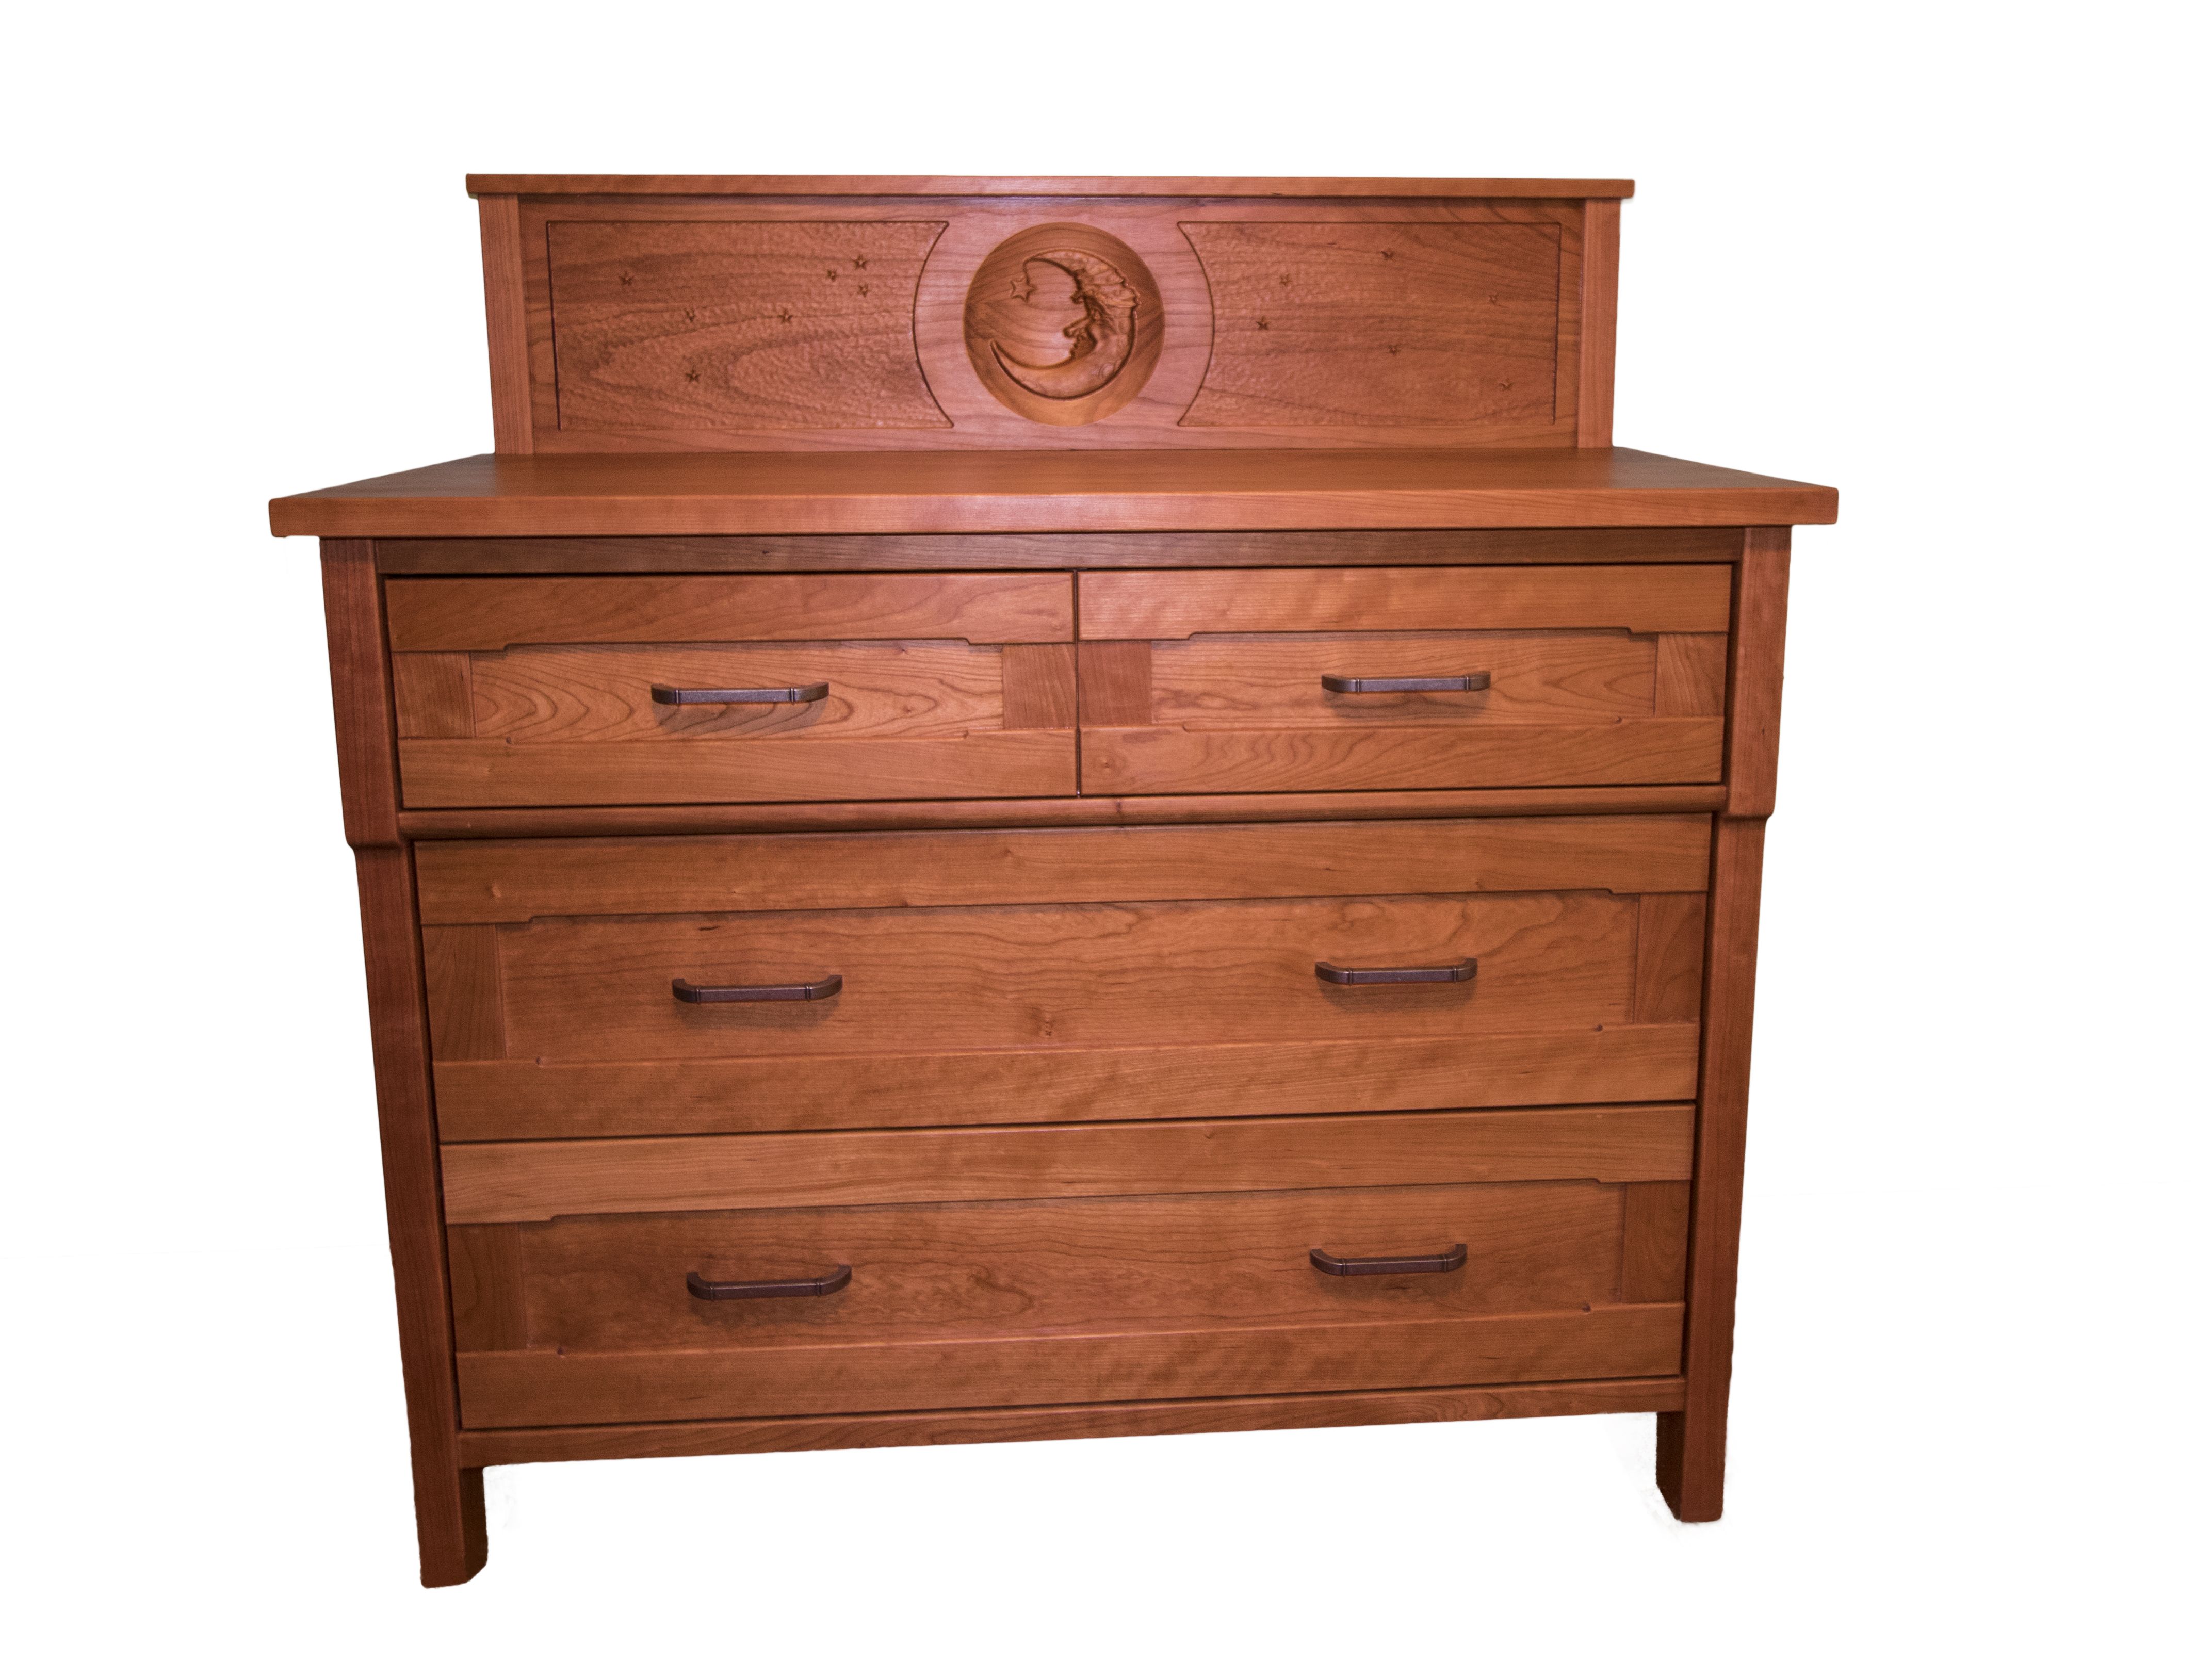 Hand Crafted Baby Changing Dresser By Chico Woodcraft Custommade Com